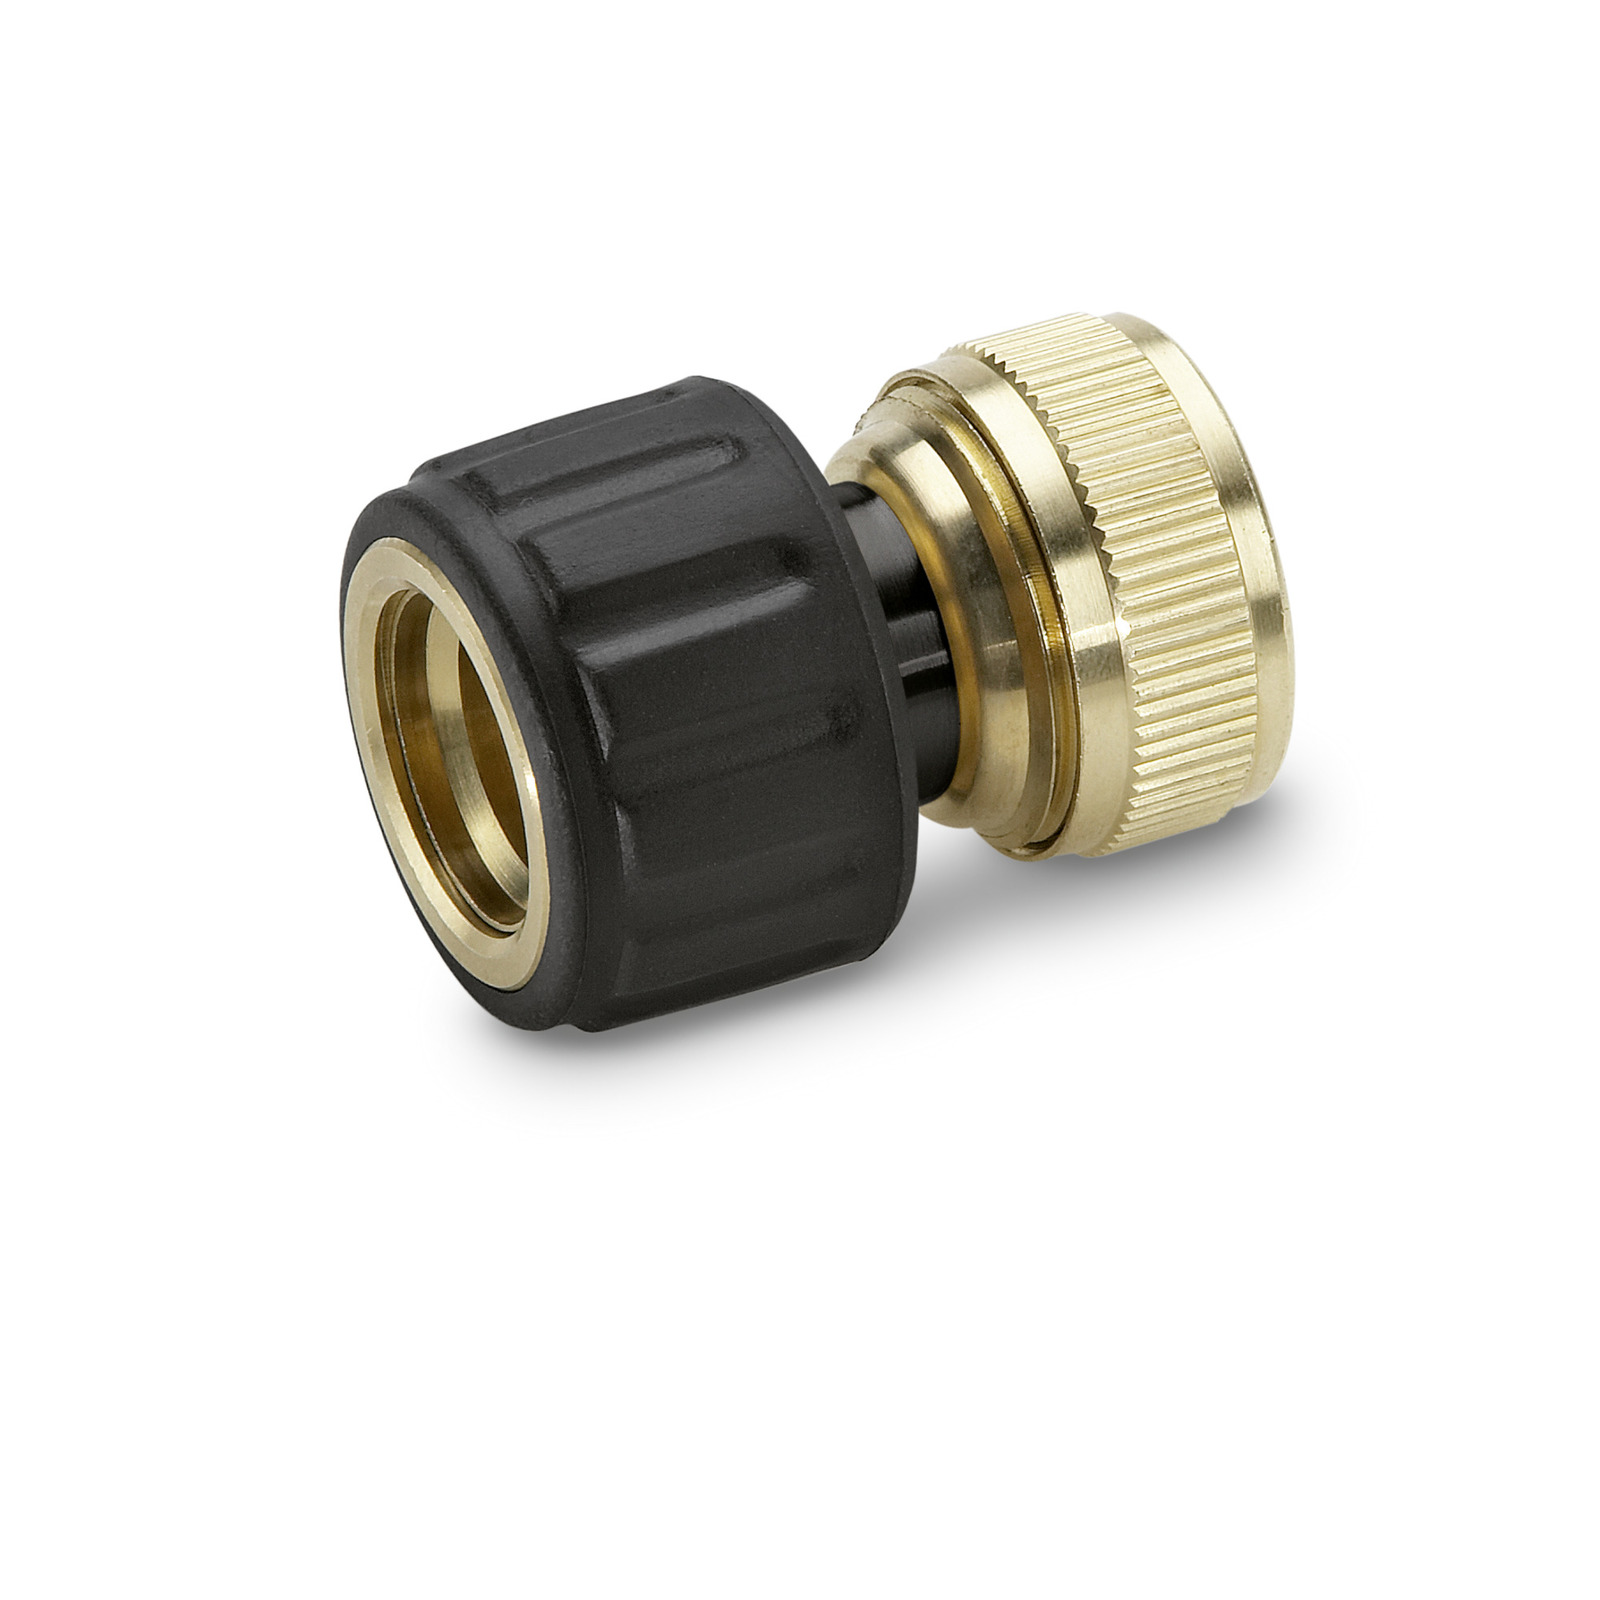 Brass Hose Connector 1 2 And 5 8 With Aqua Stop Karcher International